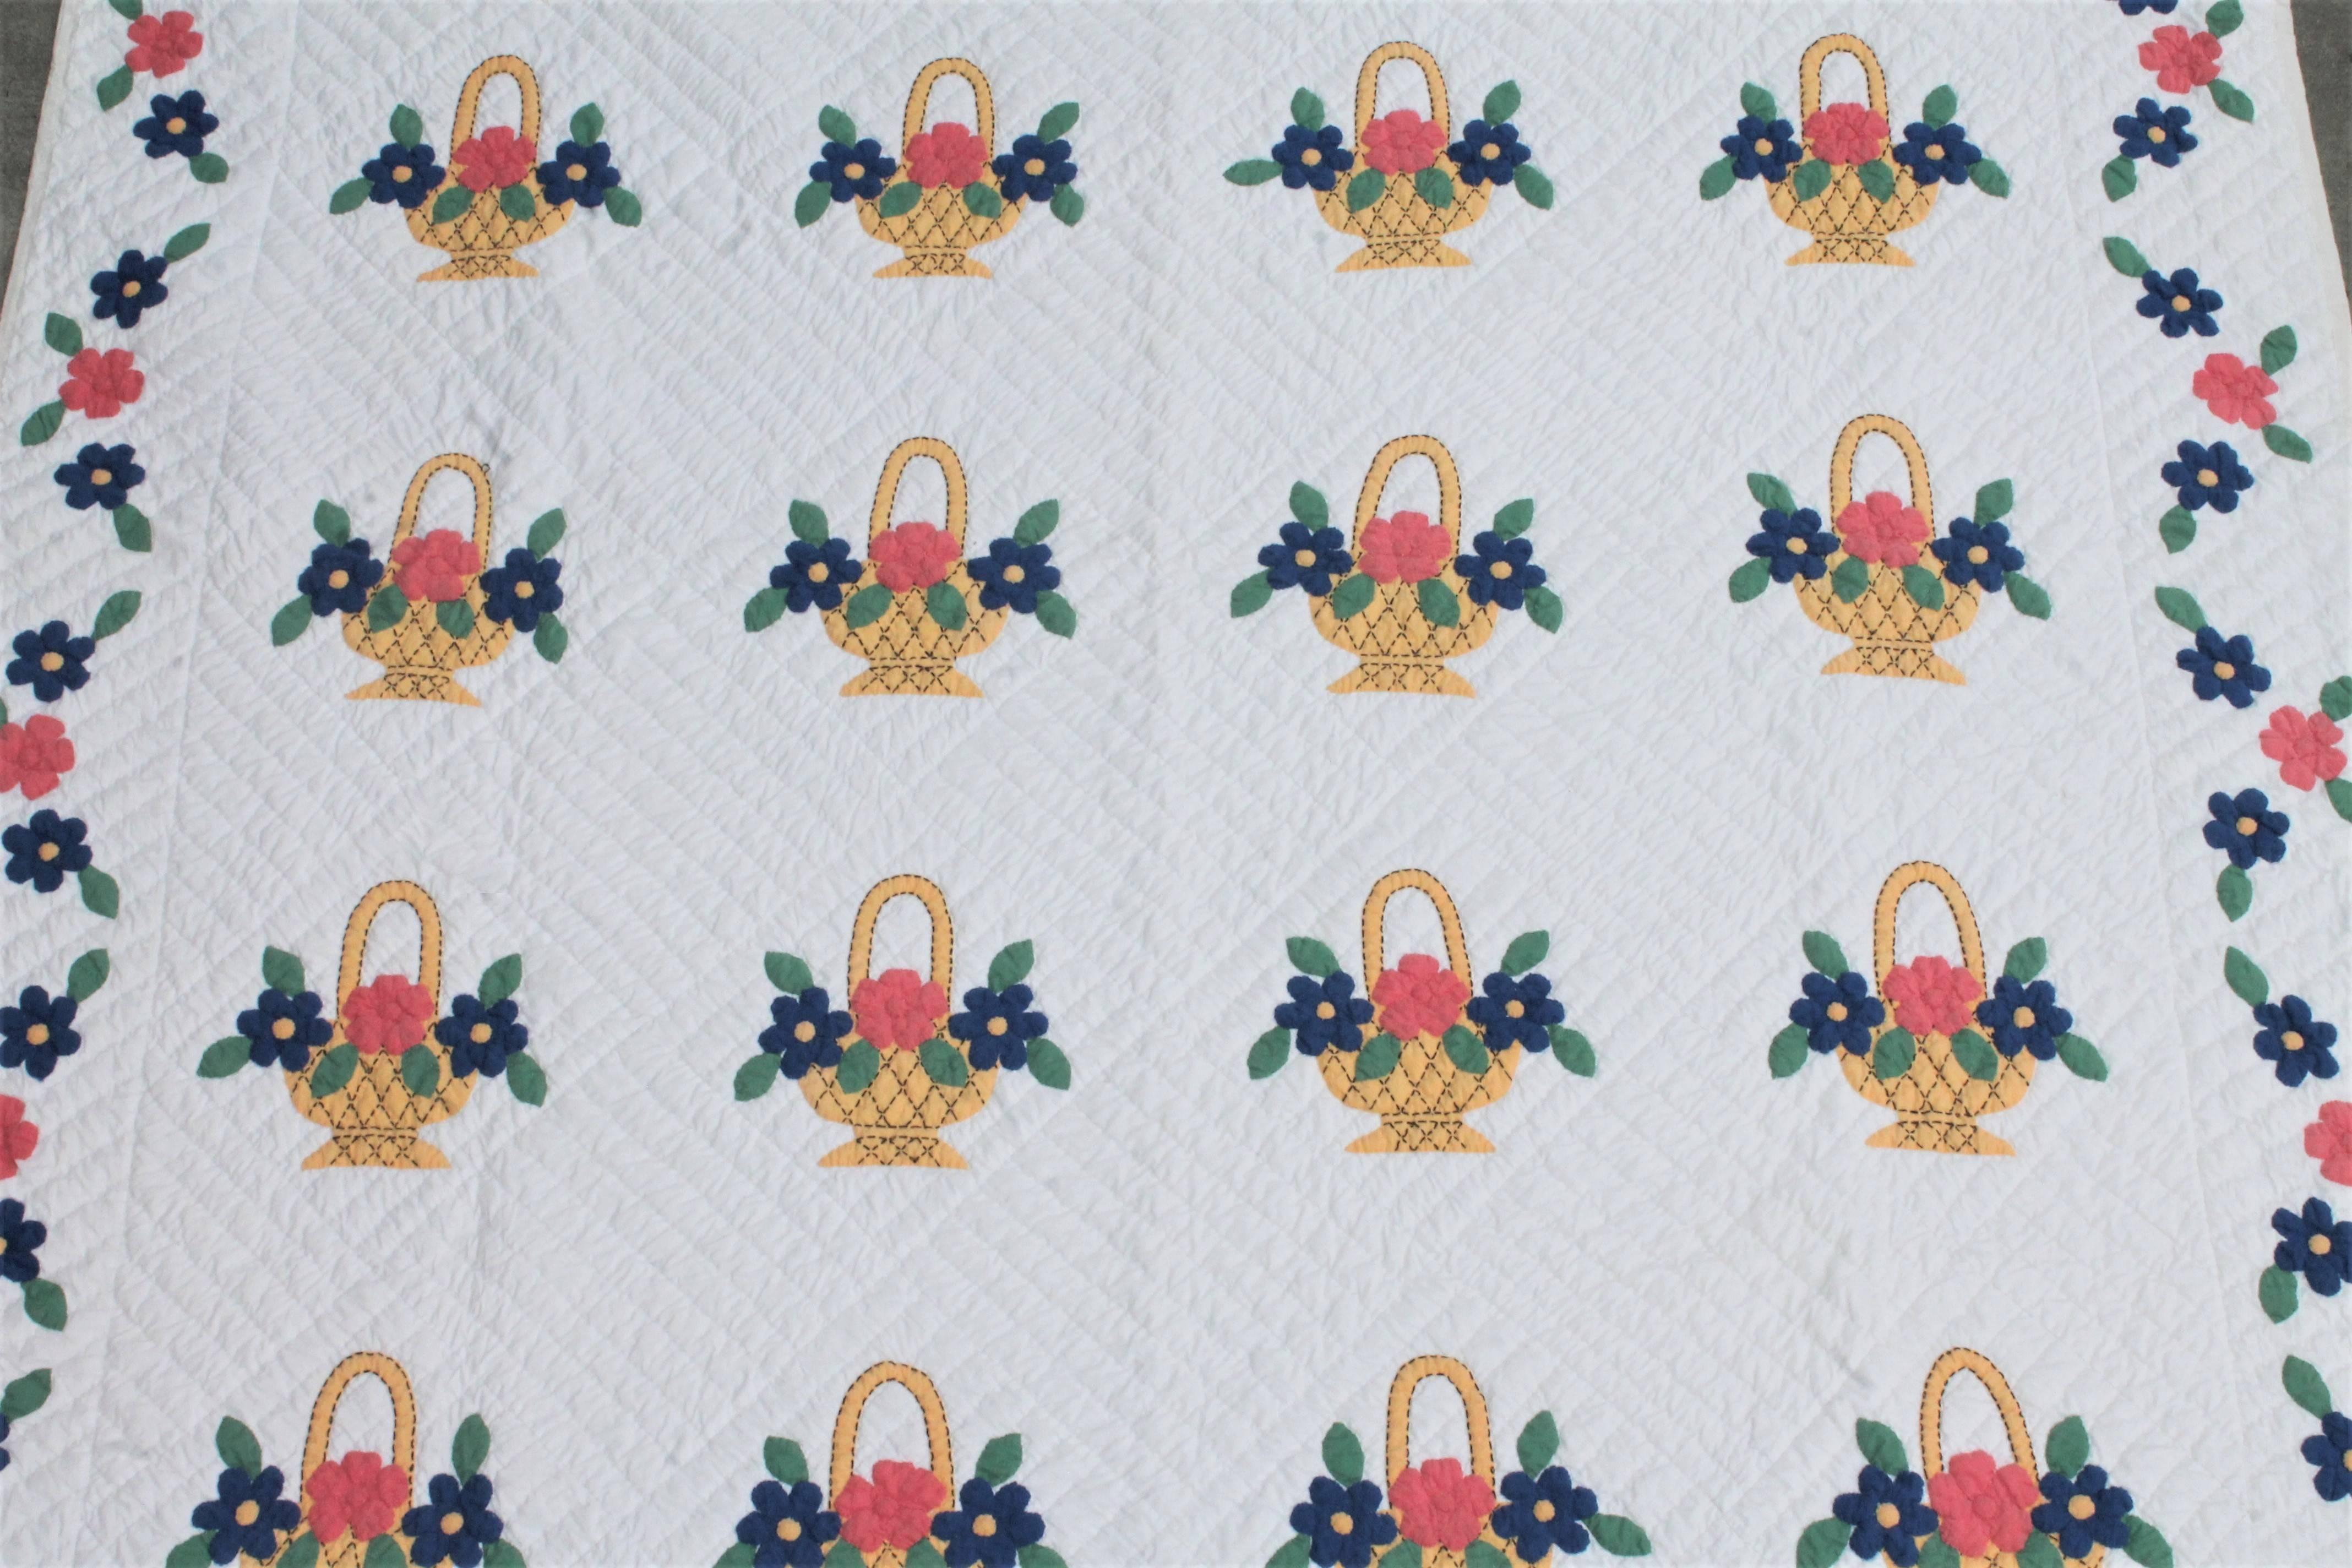 This 1930s applique pastel basket quilt is in good condition and very large in size.